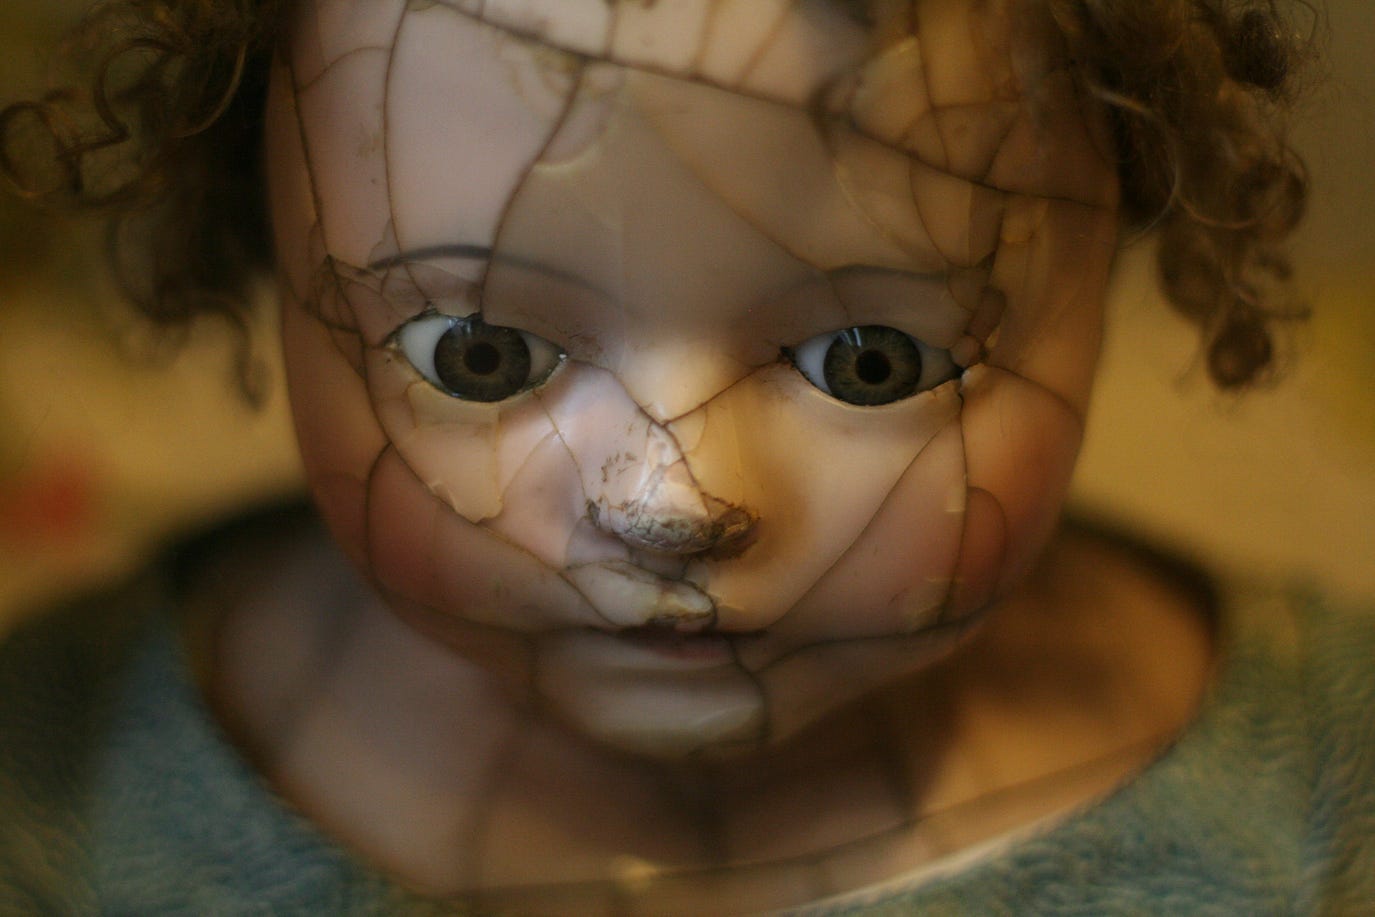 the frizzy hair, beady eyes, and face crisscrossed with scars on an antique doll. the effect is rather sad.